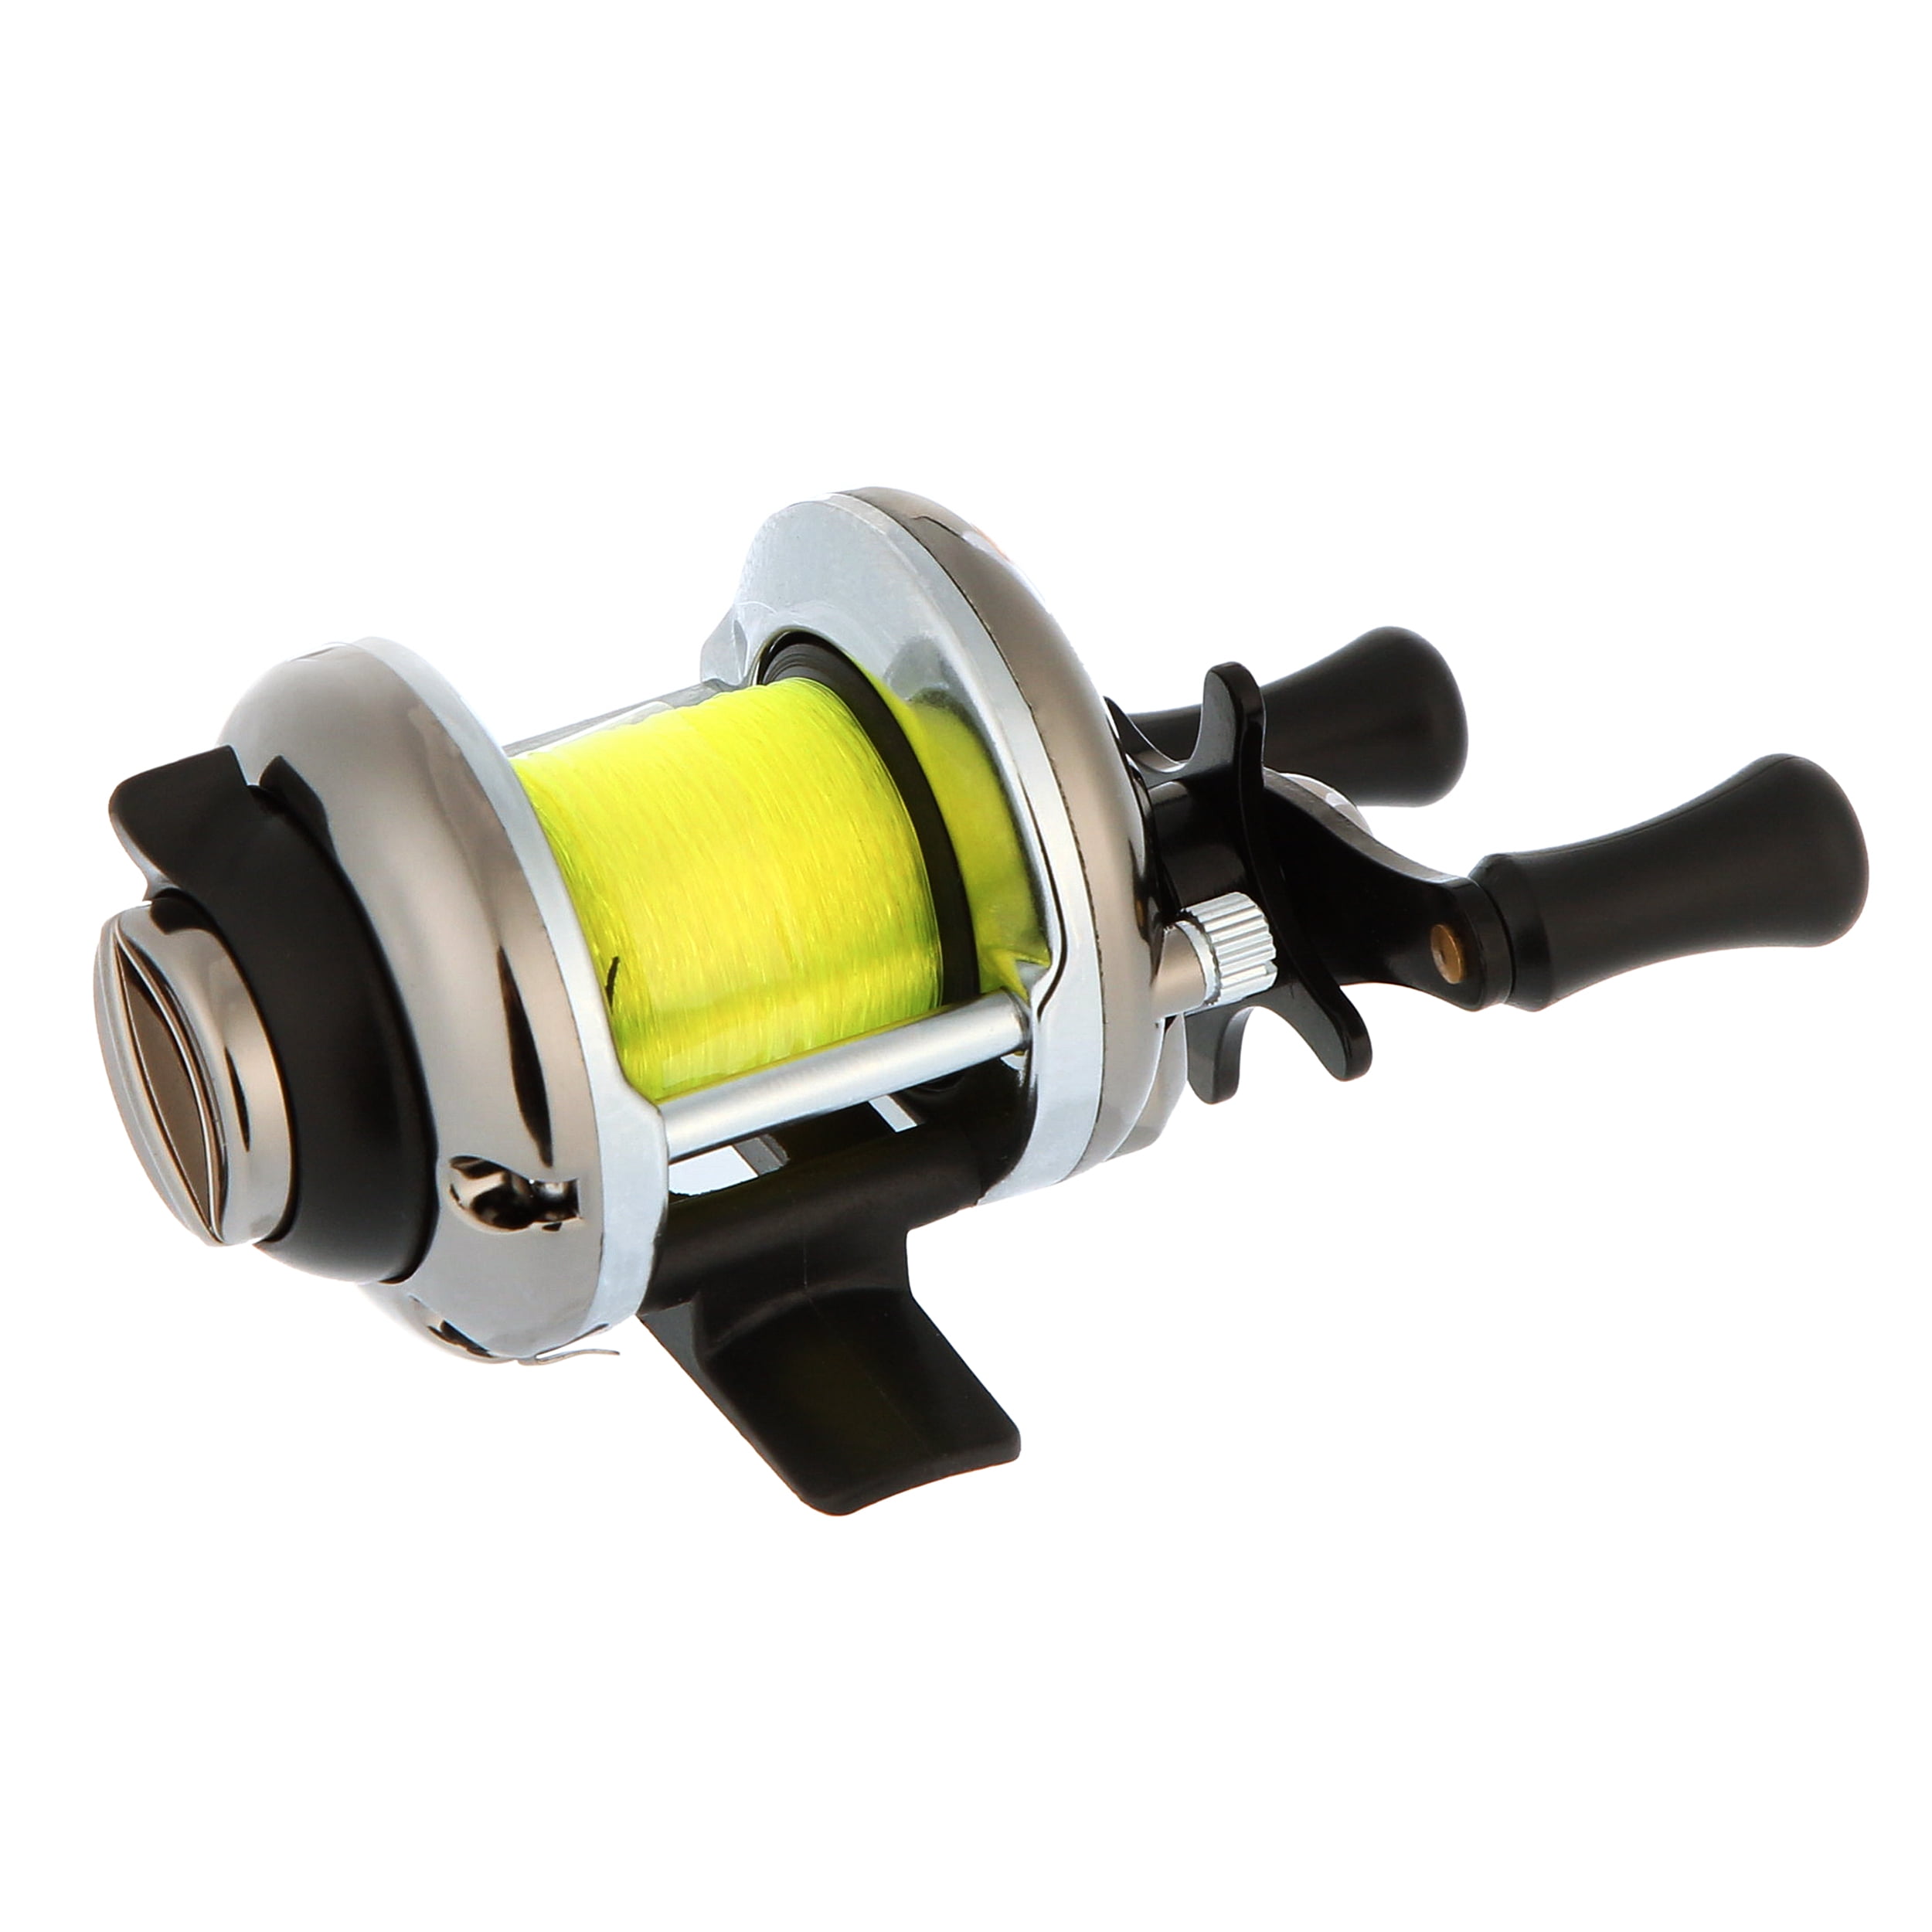 Lew's Mr. Crappie Slab Daddy Deluxe Fishing Reel